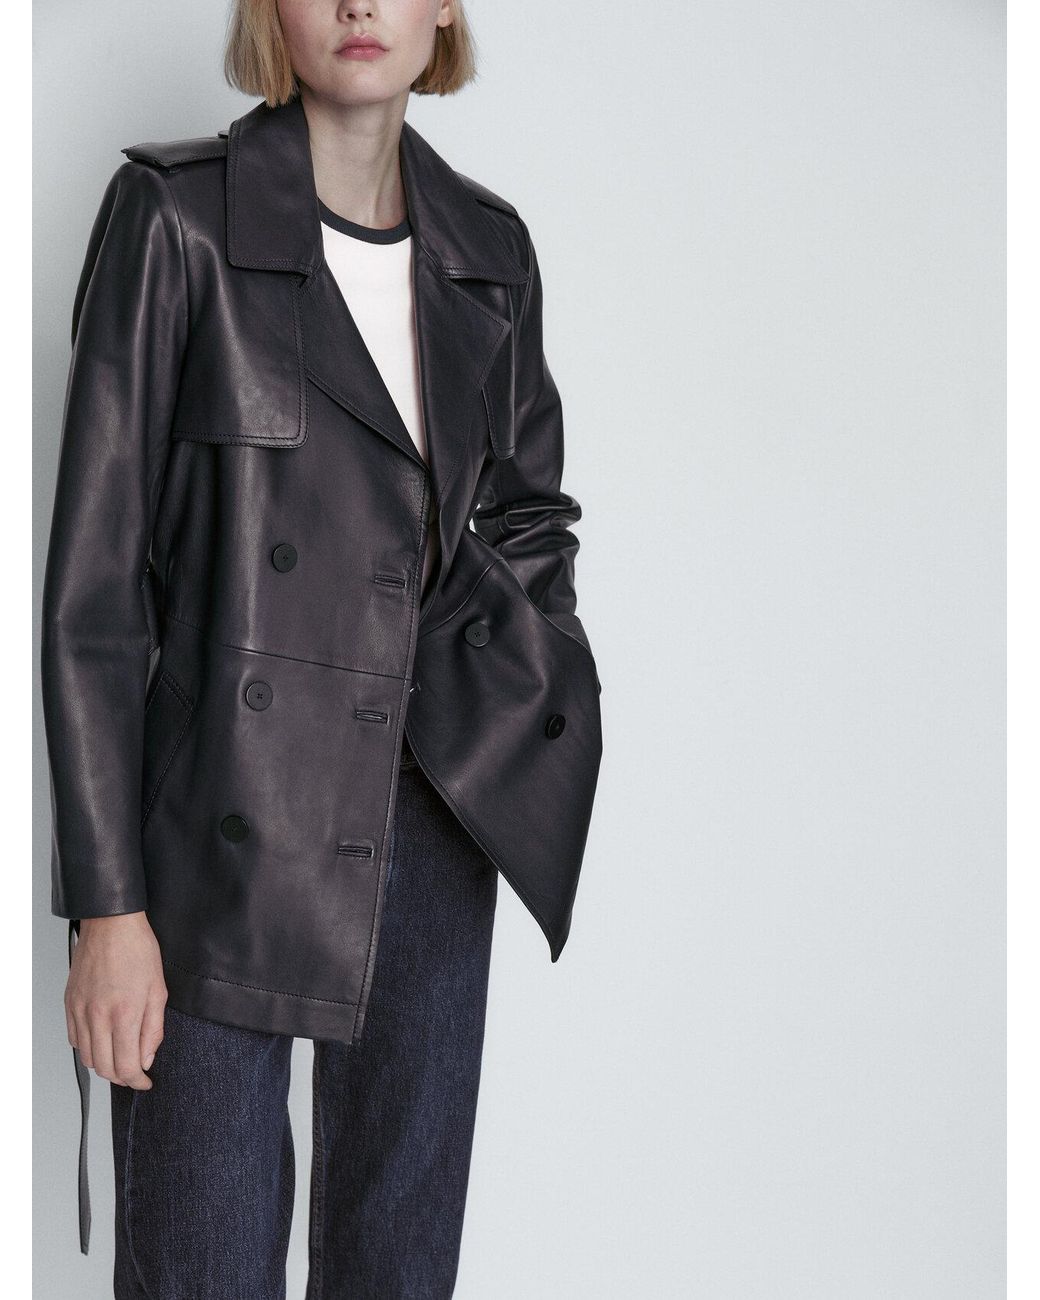 MASSIMO DUTTI Cropped Nappa Leather Trench Coat in Black | Lyst